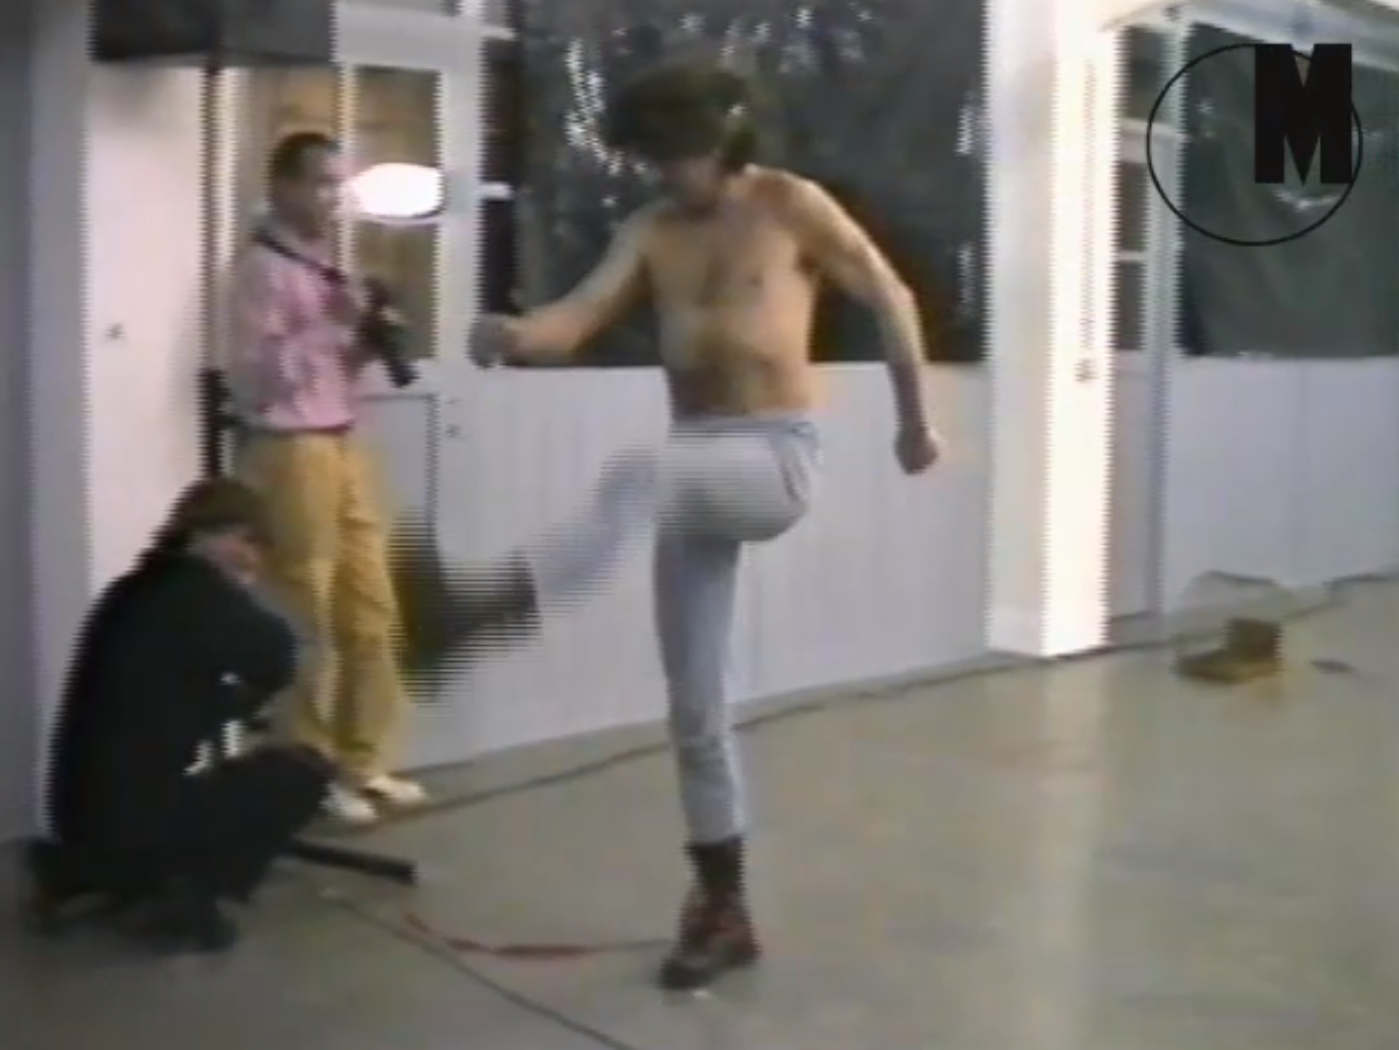 Zbigniew Warpechowski, 'Marsz' [March], stillframe from a video registration of a performance, Stuttgart 1984, courtesy of Artists' Archives of The Museum of Modern Art in Warsaw.